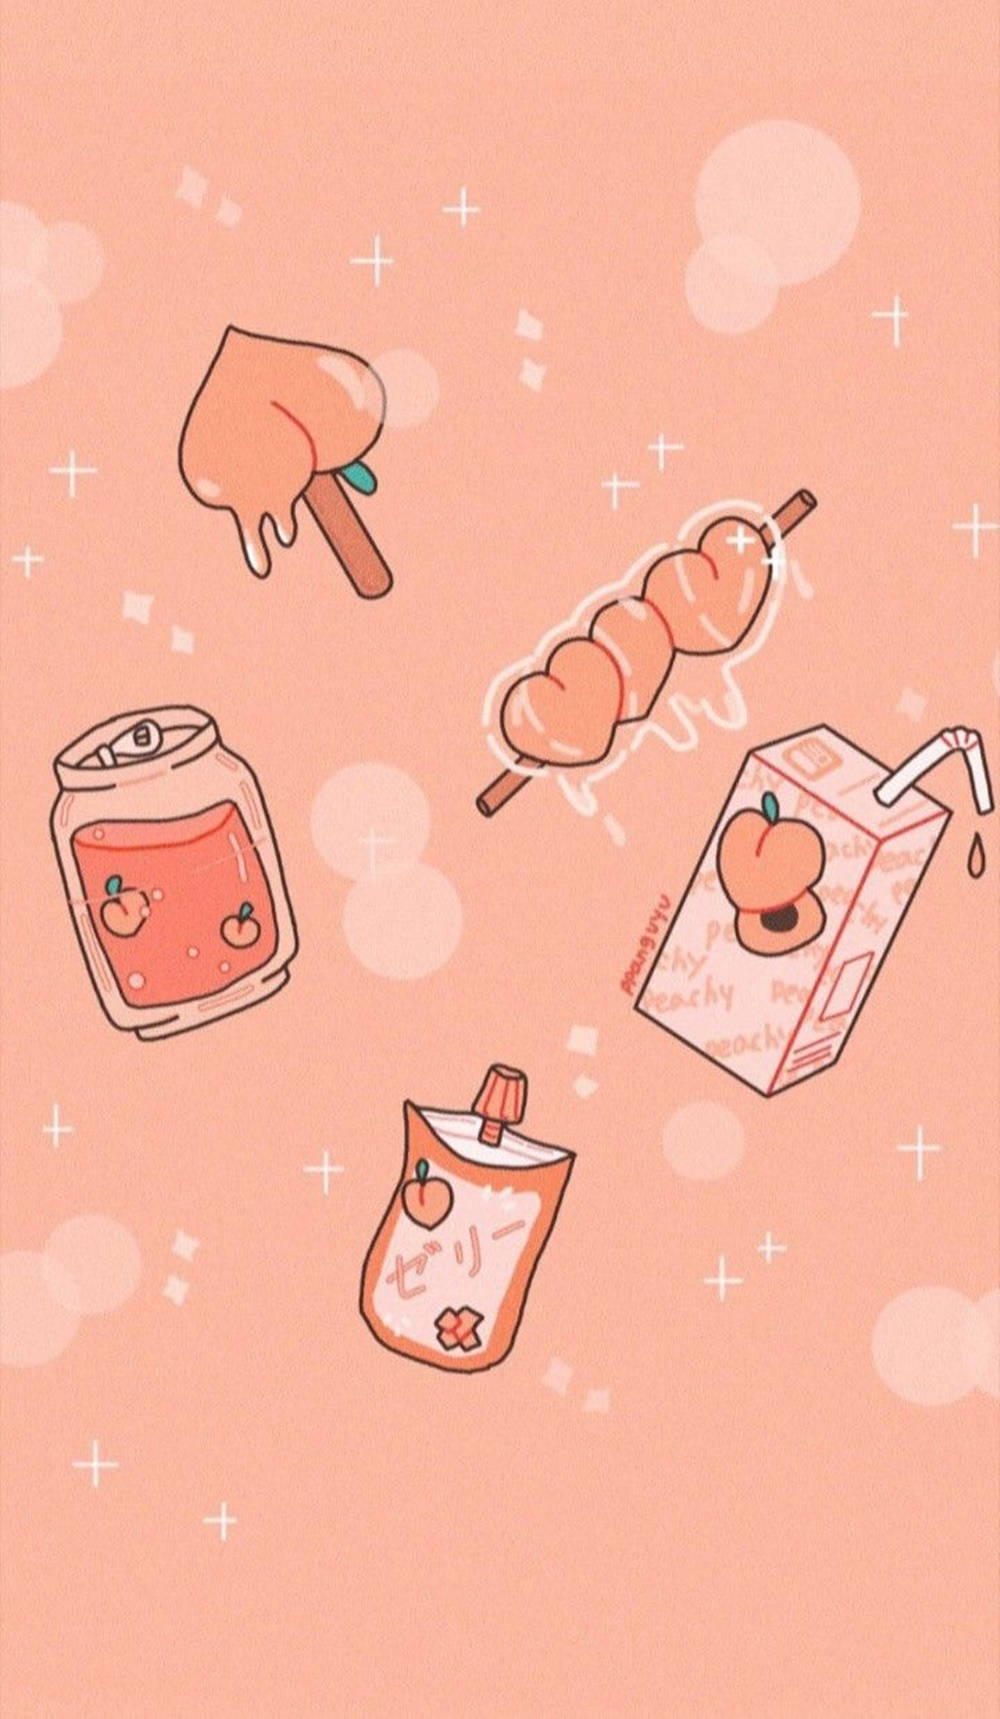 Show Off Your Kawaii Side With This Cute Pink Aesthetic Wallpaper! Wallpaper